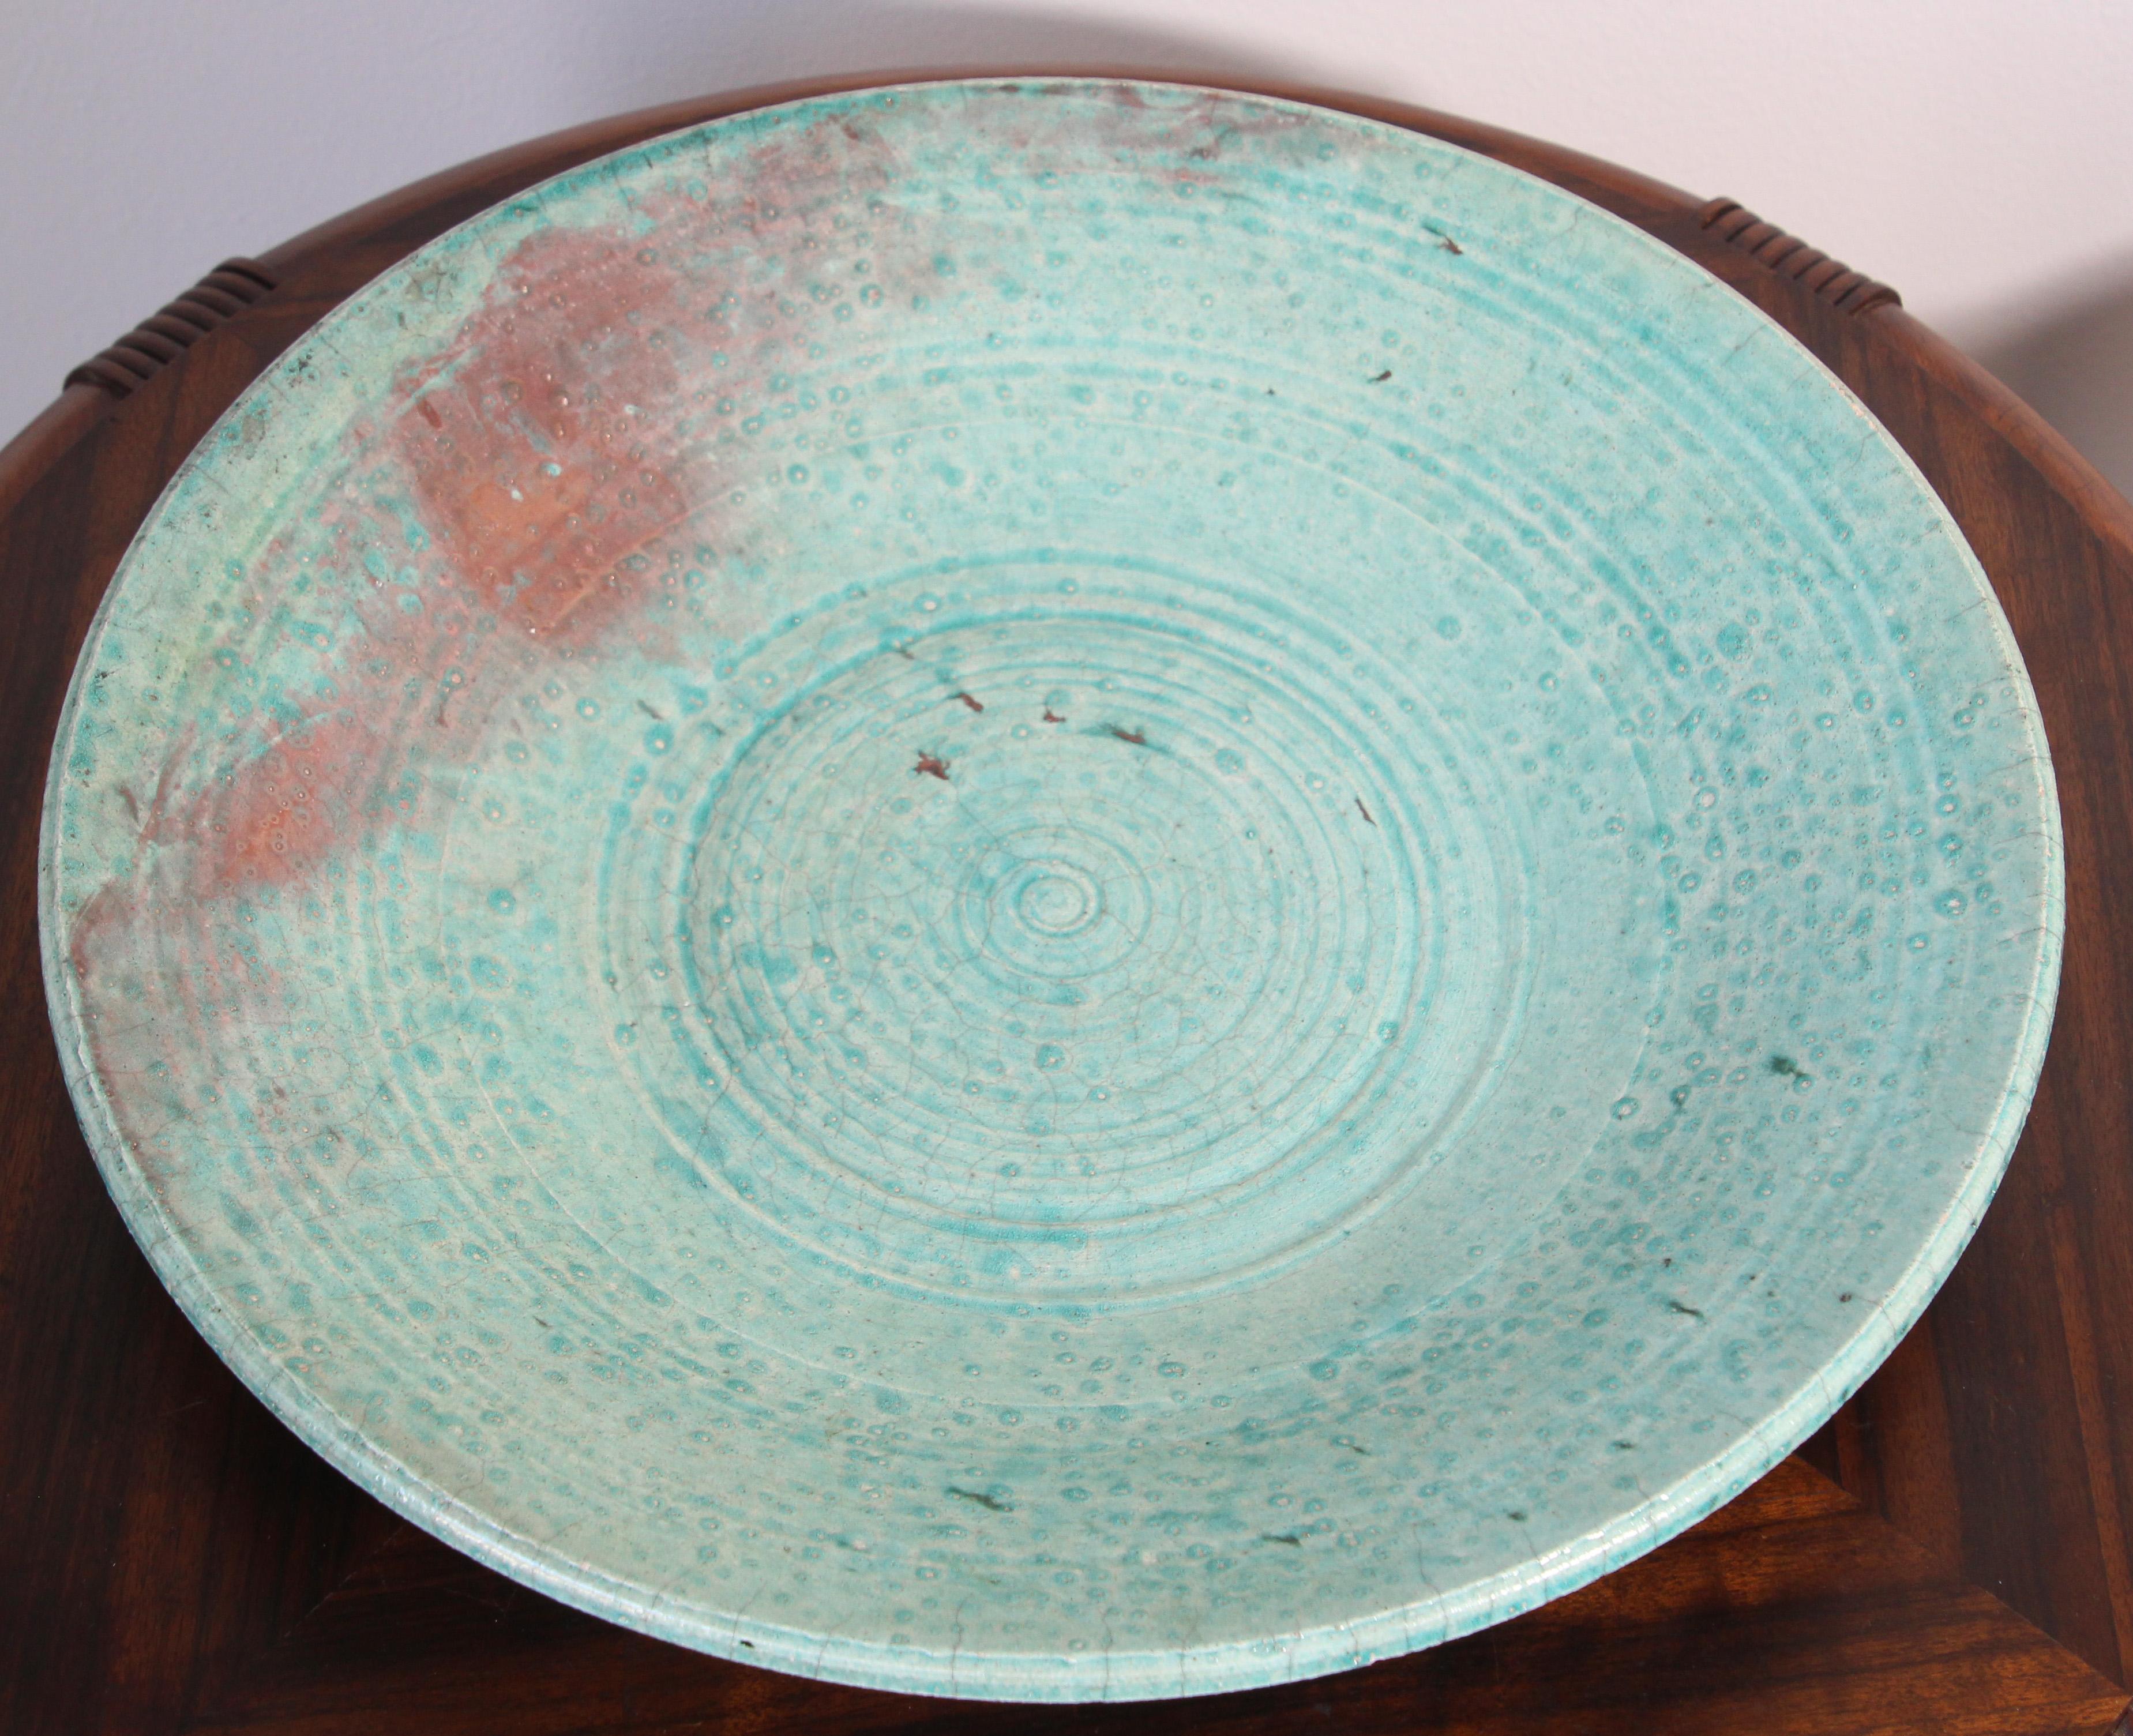 Large 1960s Mid-Century Modern handcrafted large pottery platter.
Hand-made stoneware decorative plate with classic sandy fat lava glaze.
This ceramics were known to collectors as 'fat lava' and were made during the 1960s and the 1970s
Handcrafted